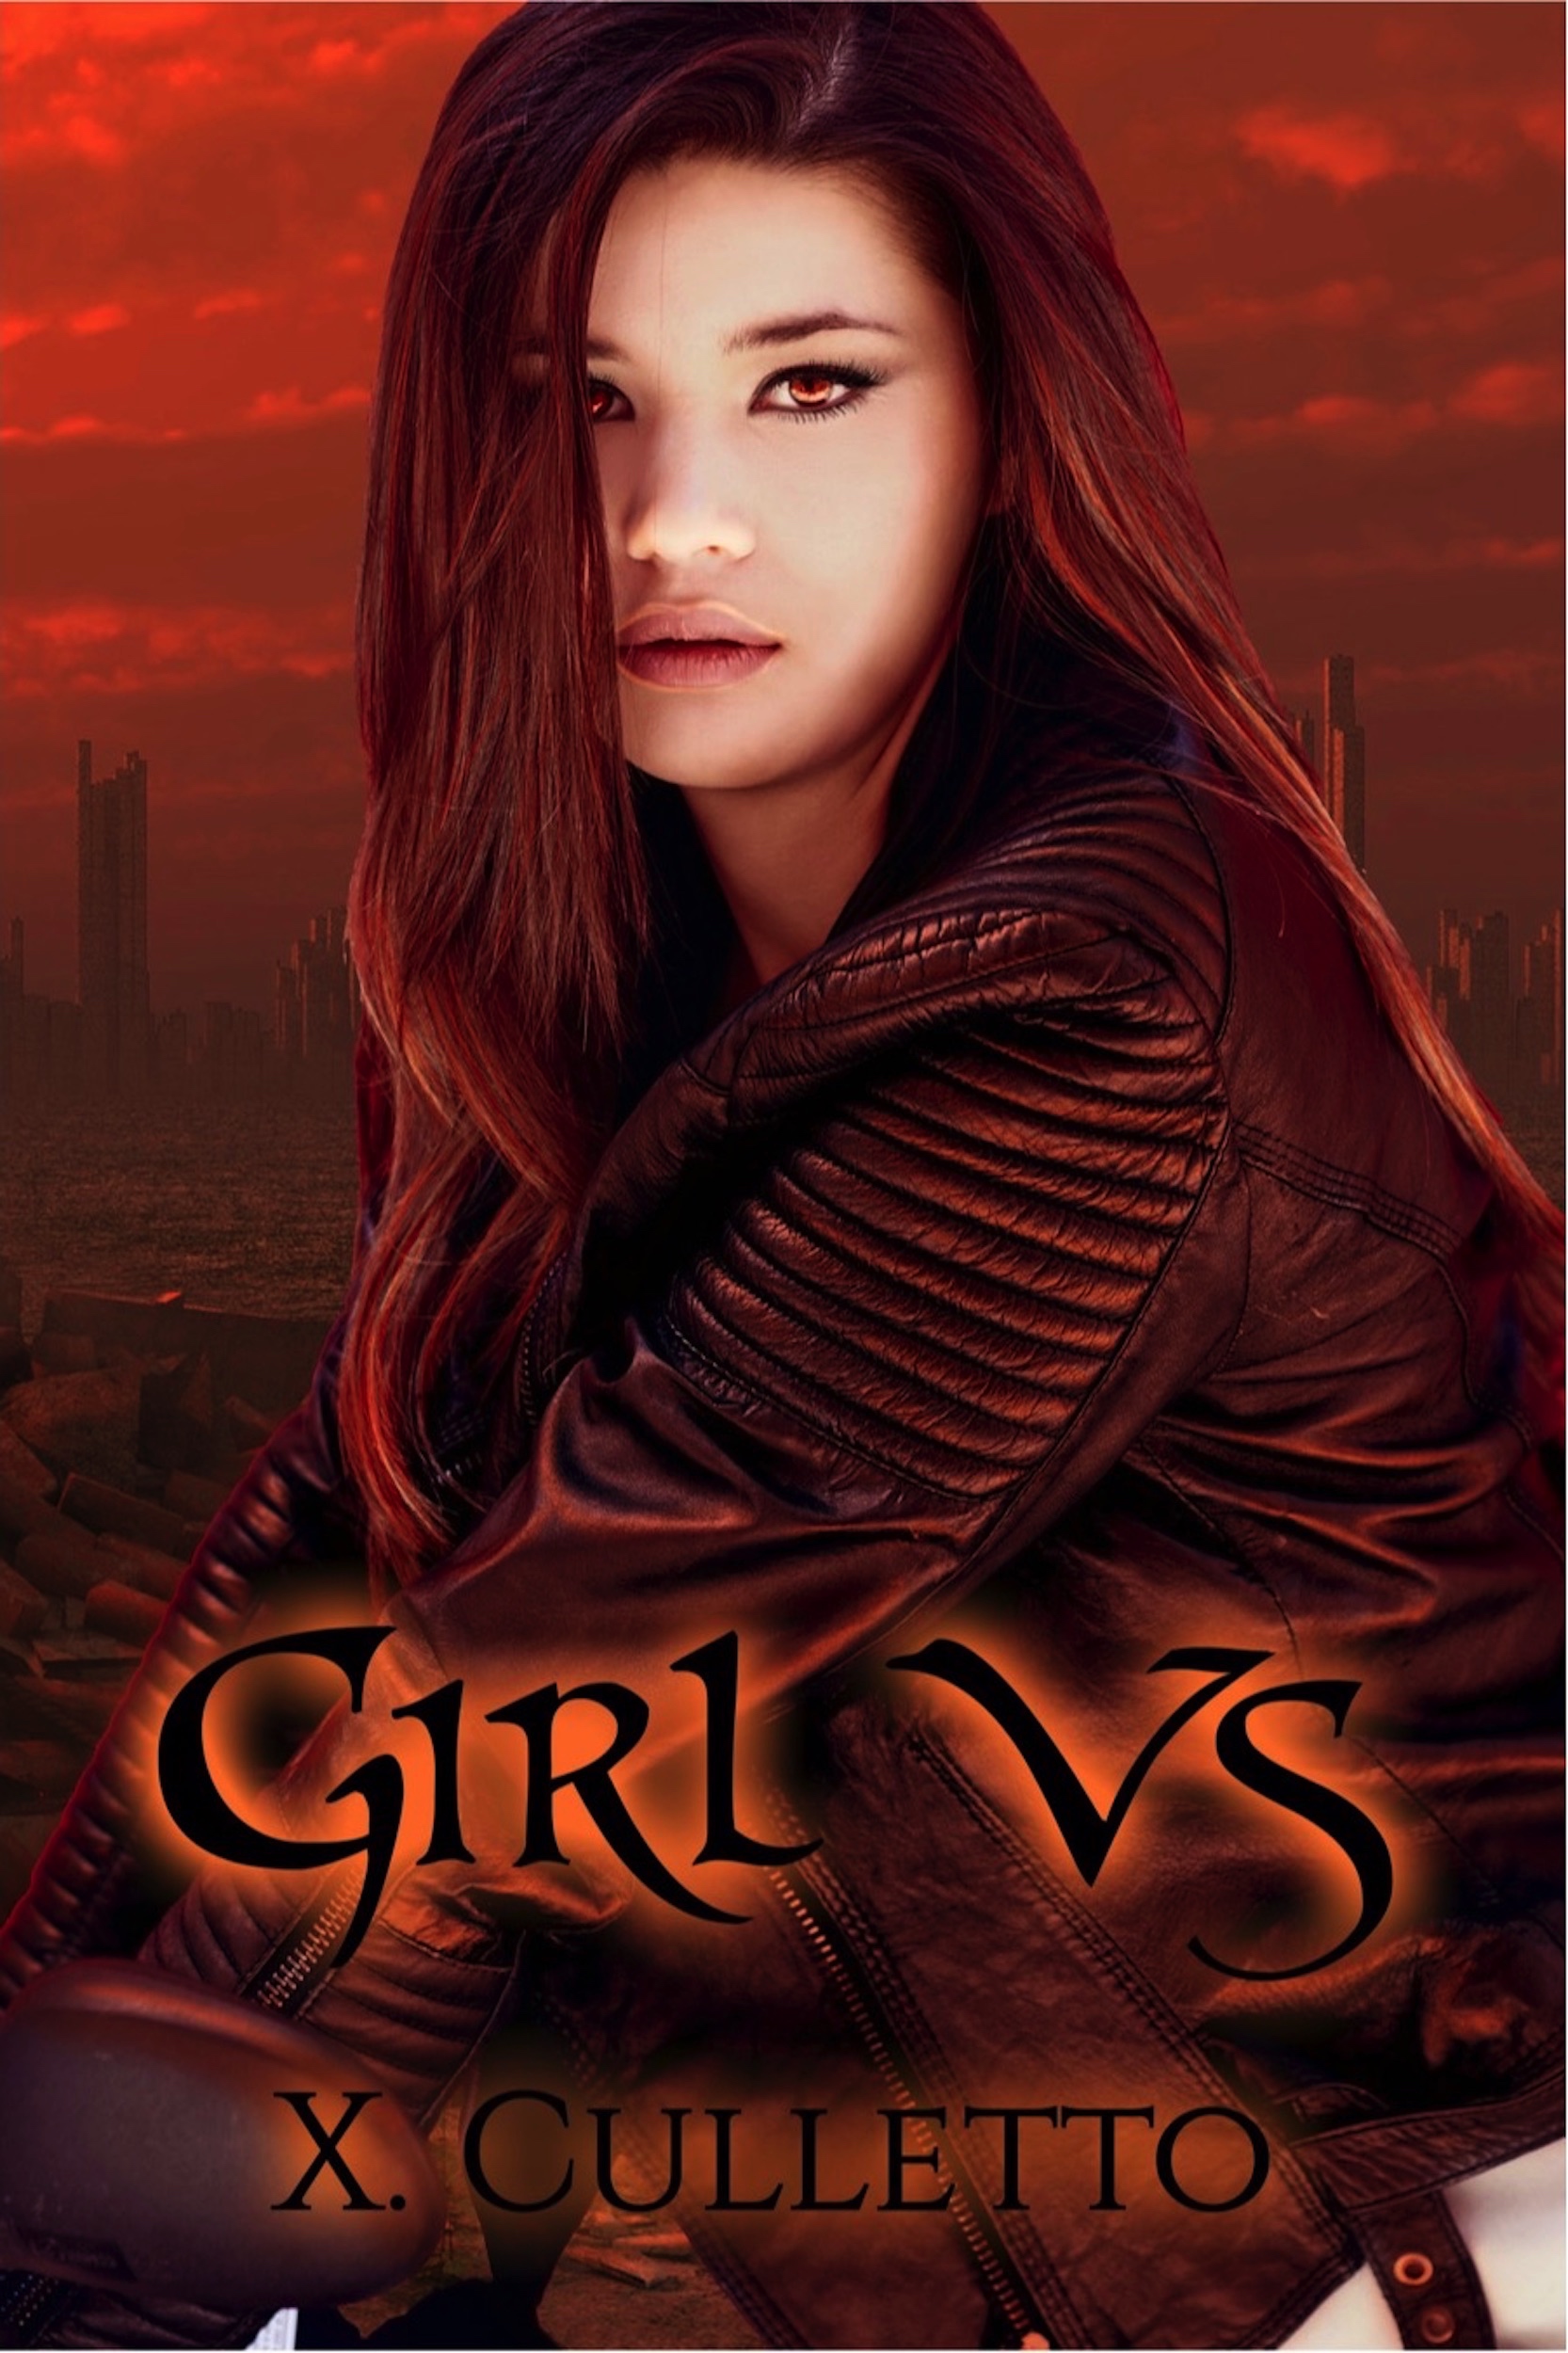 FREE: Girl Vs by X. Culletto